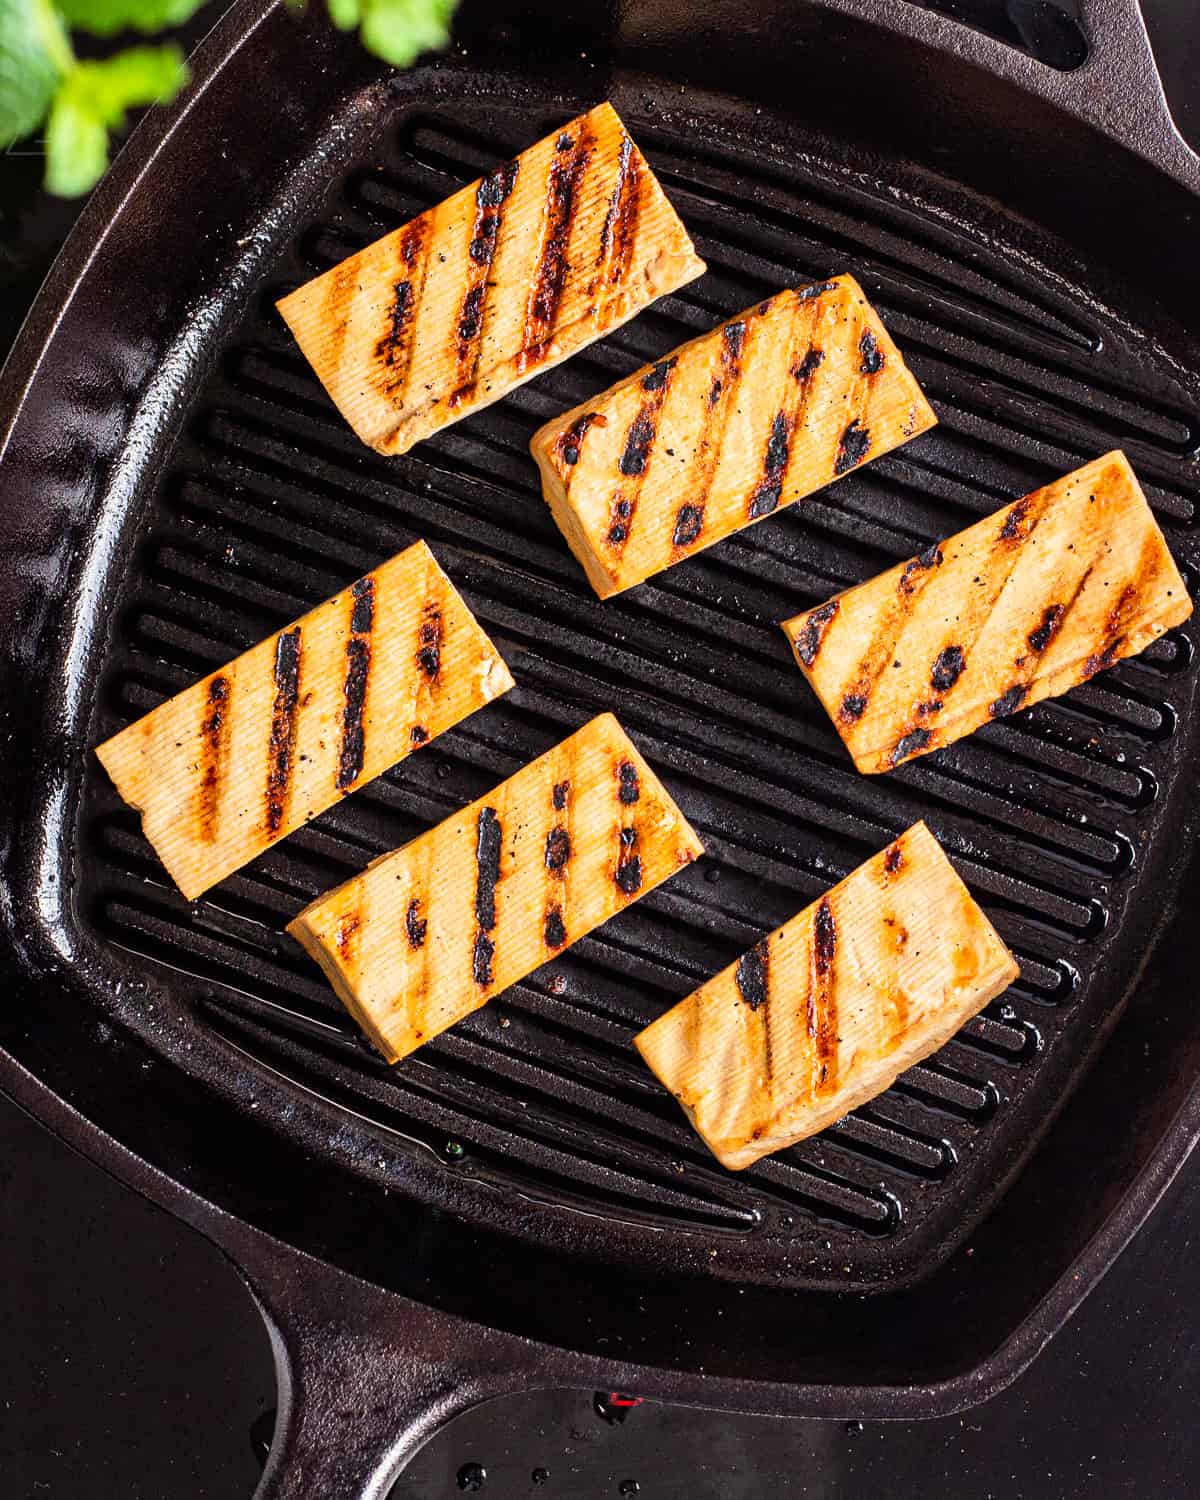 Flipped tofu planks with grill marks in a black cast-iron grill pan.